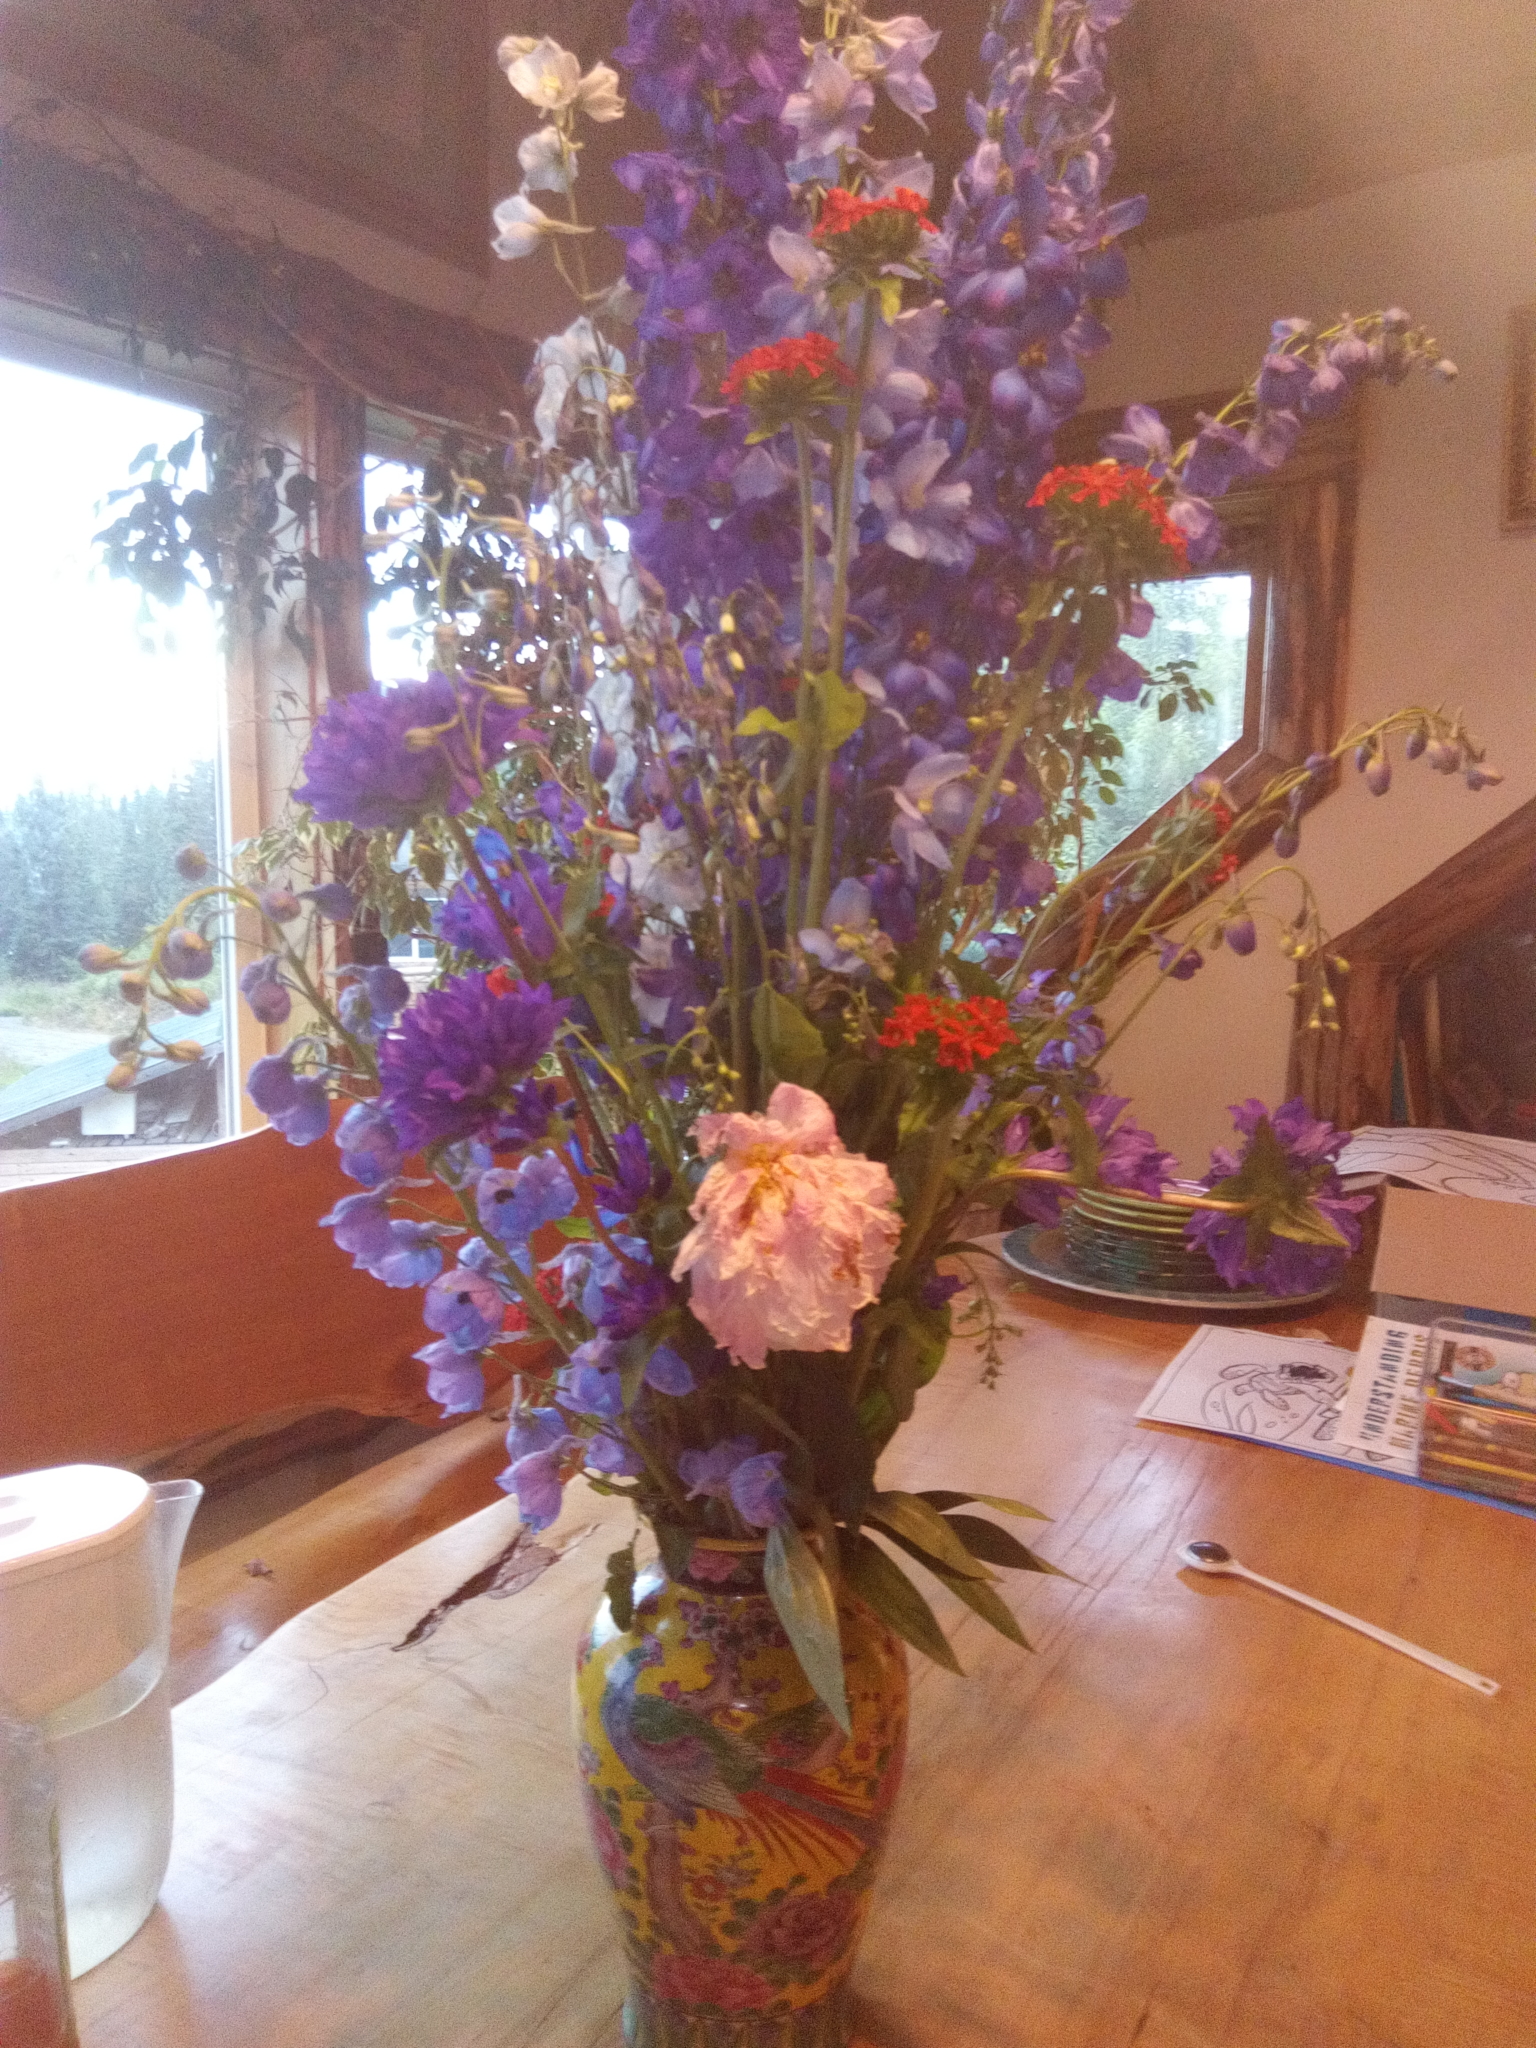 Flowers on the dining table.